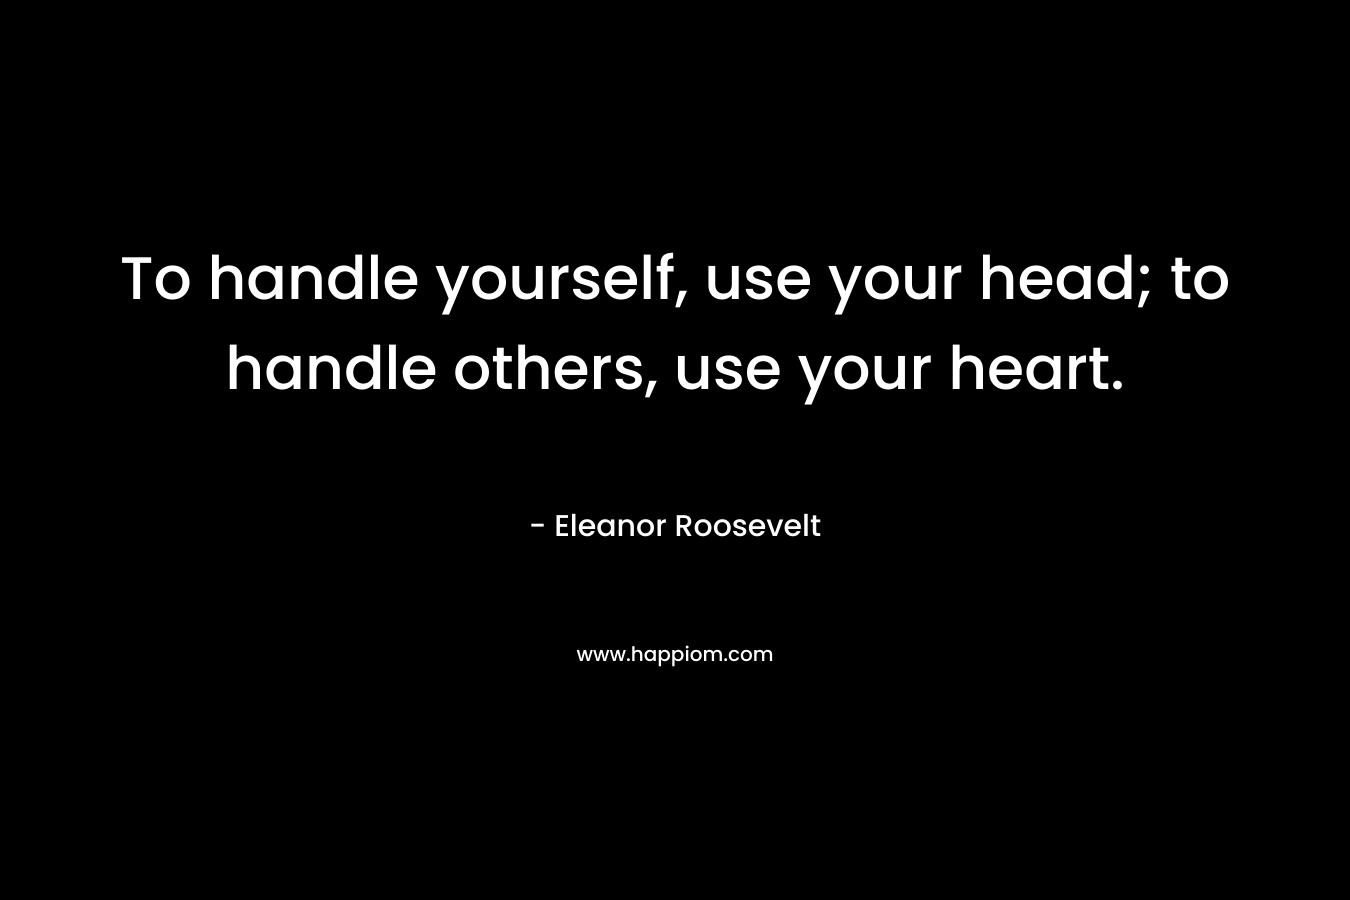 To handle yourself, use your head; to handle others, use your heart.